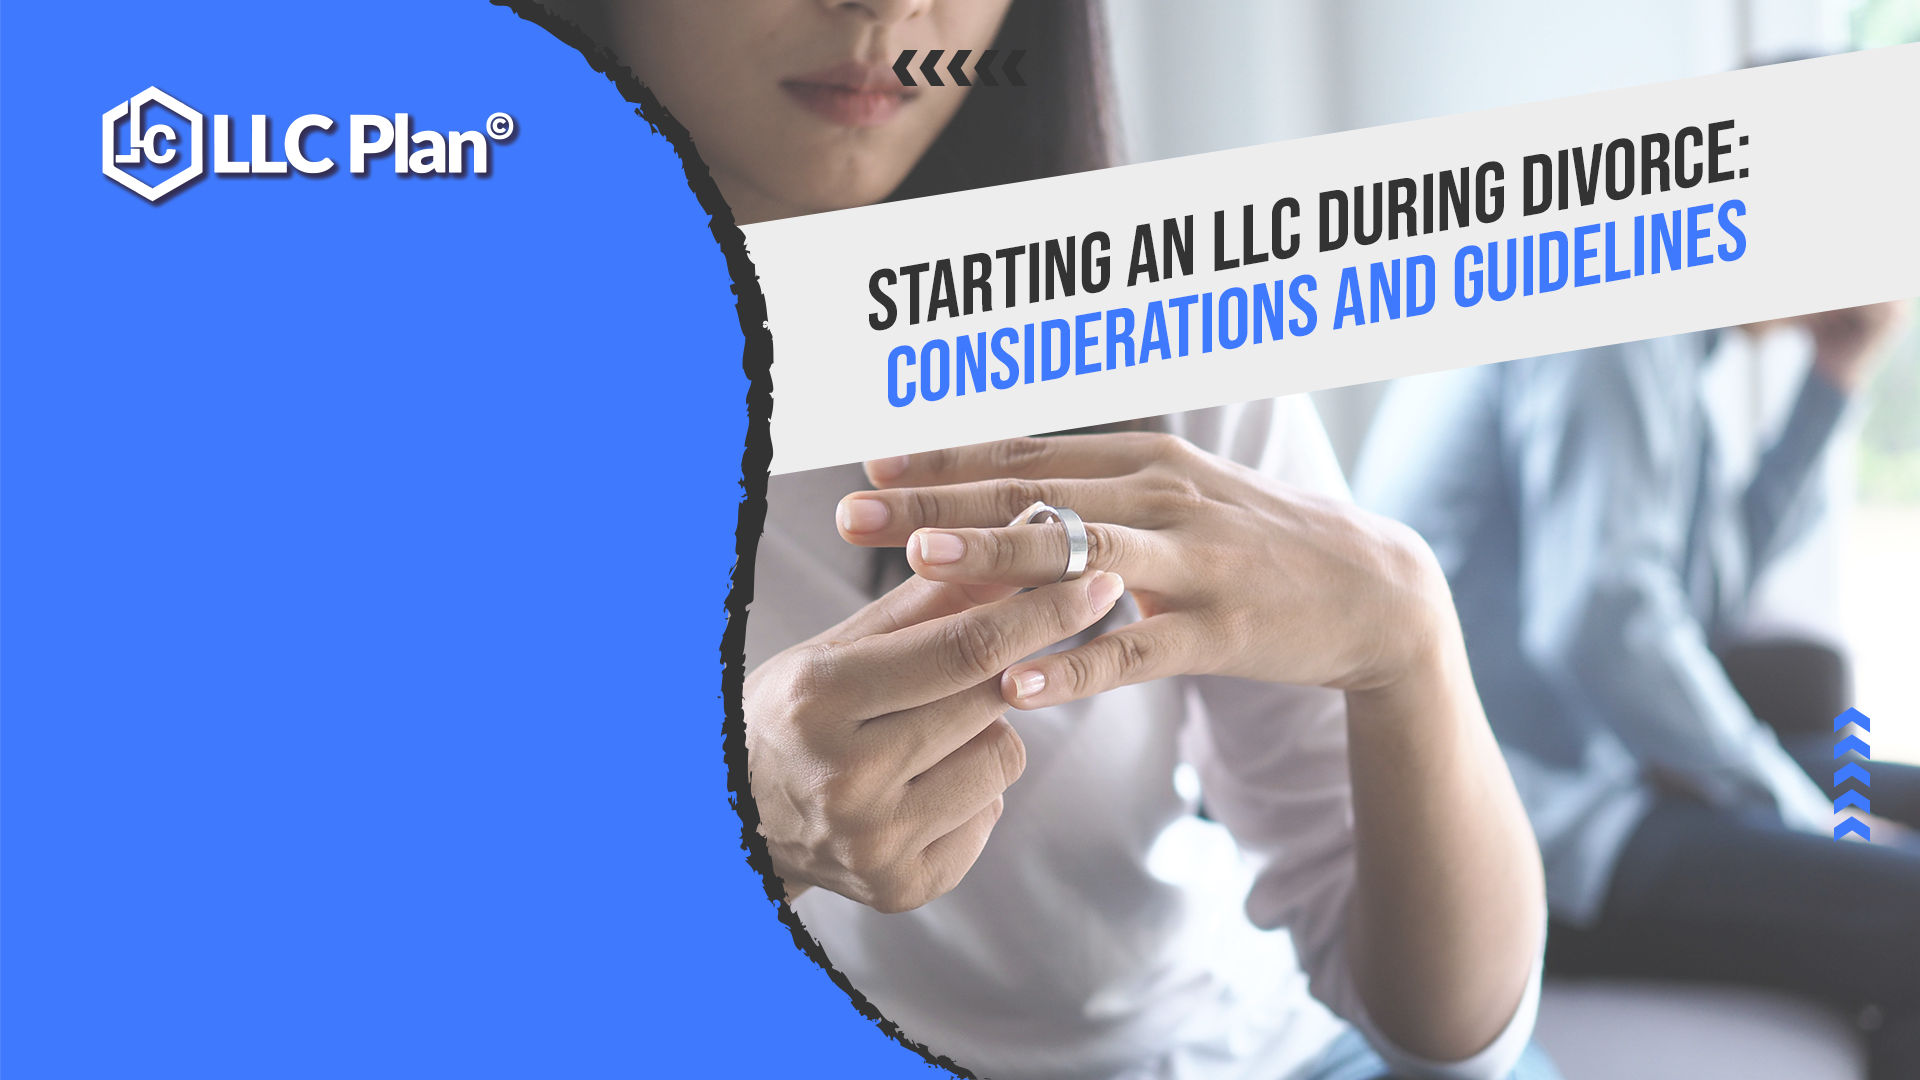 Starting an LLC During Divorce: Considerations and Guidelines